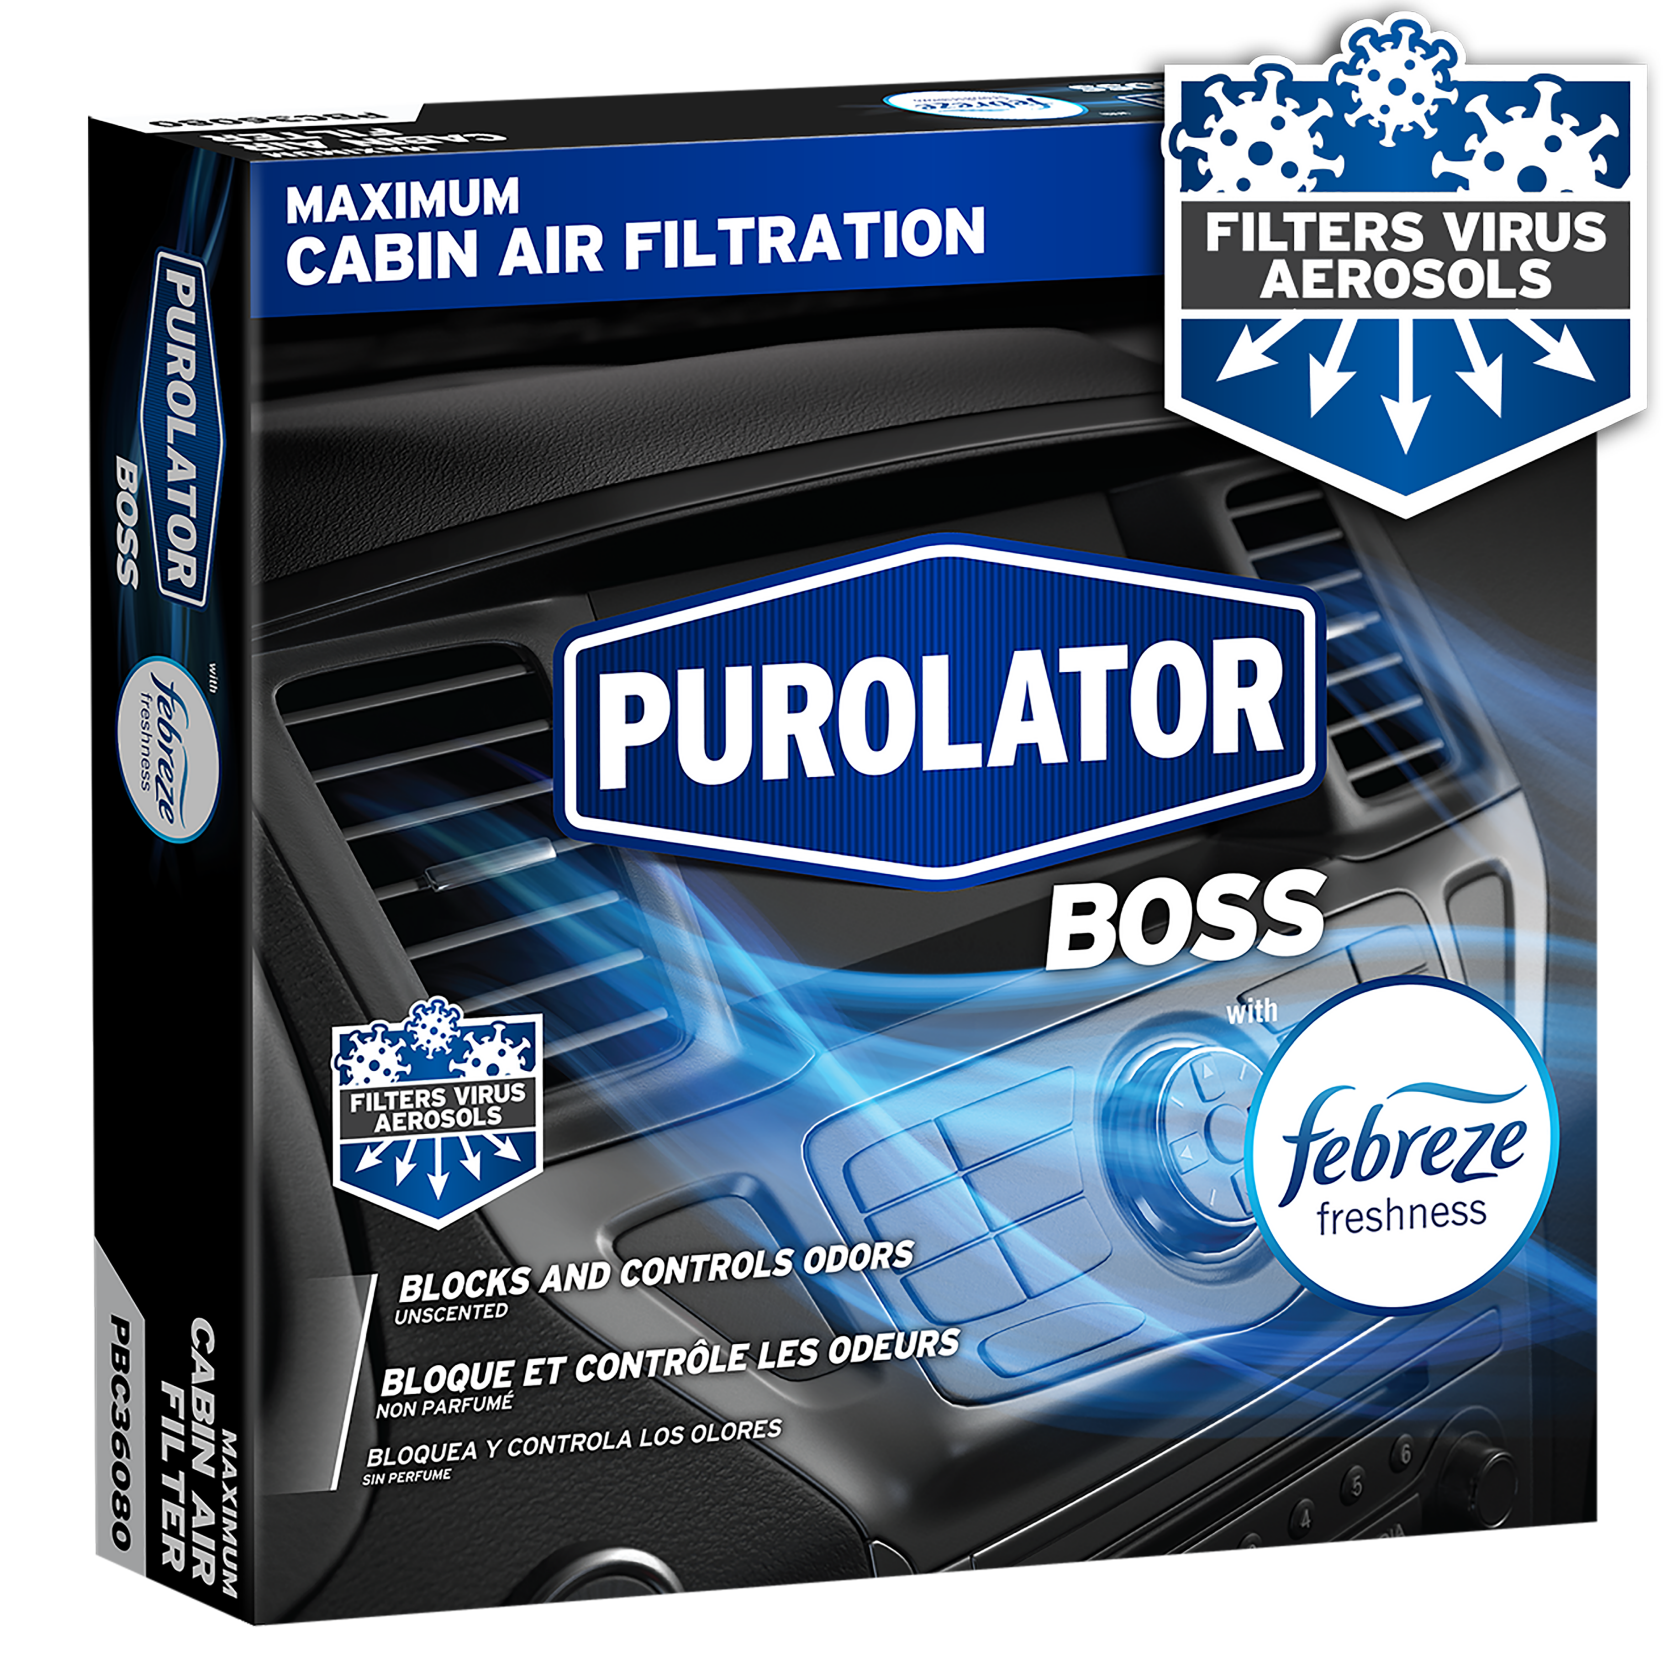 PurolatorBOSS® Premium Cabin Air Filters with Febreze Freshness block and control odors while preventing mold and bacteria growth.